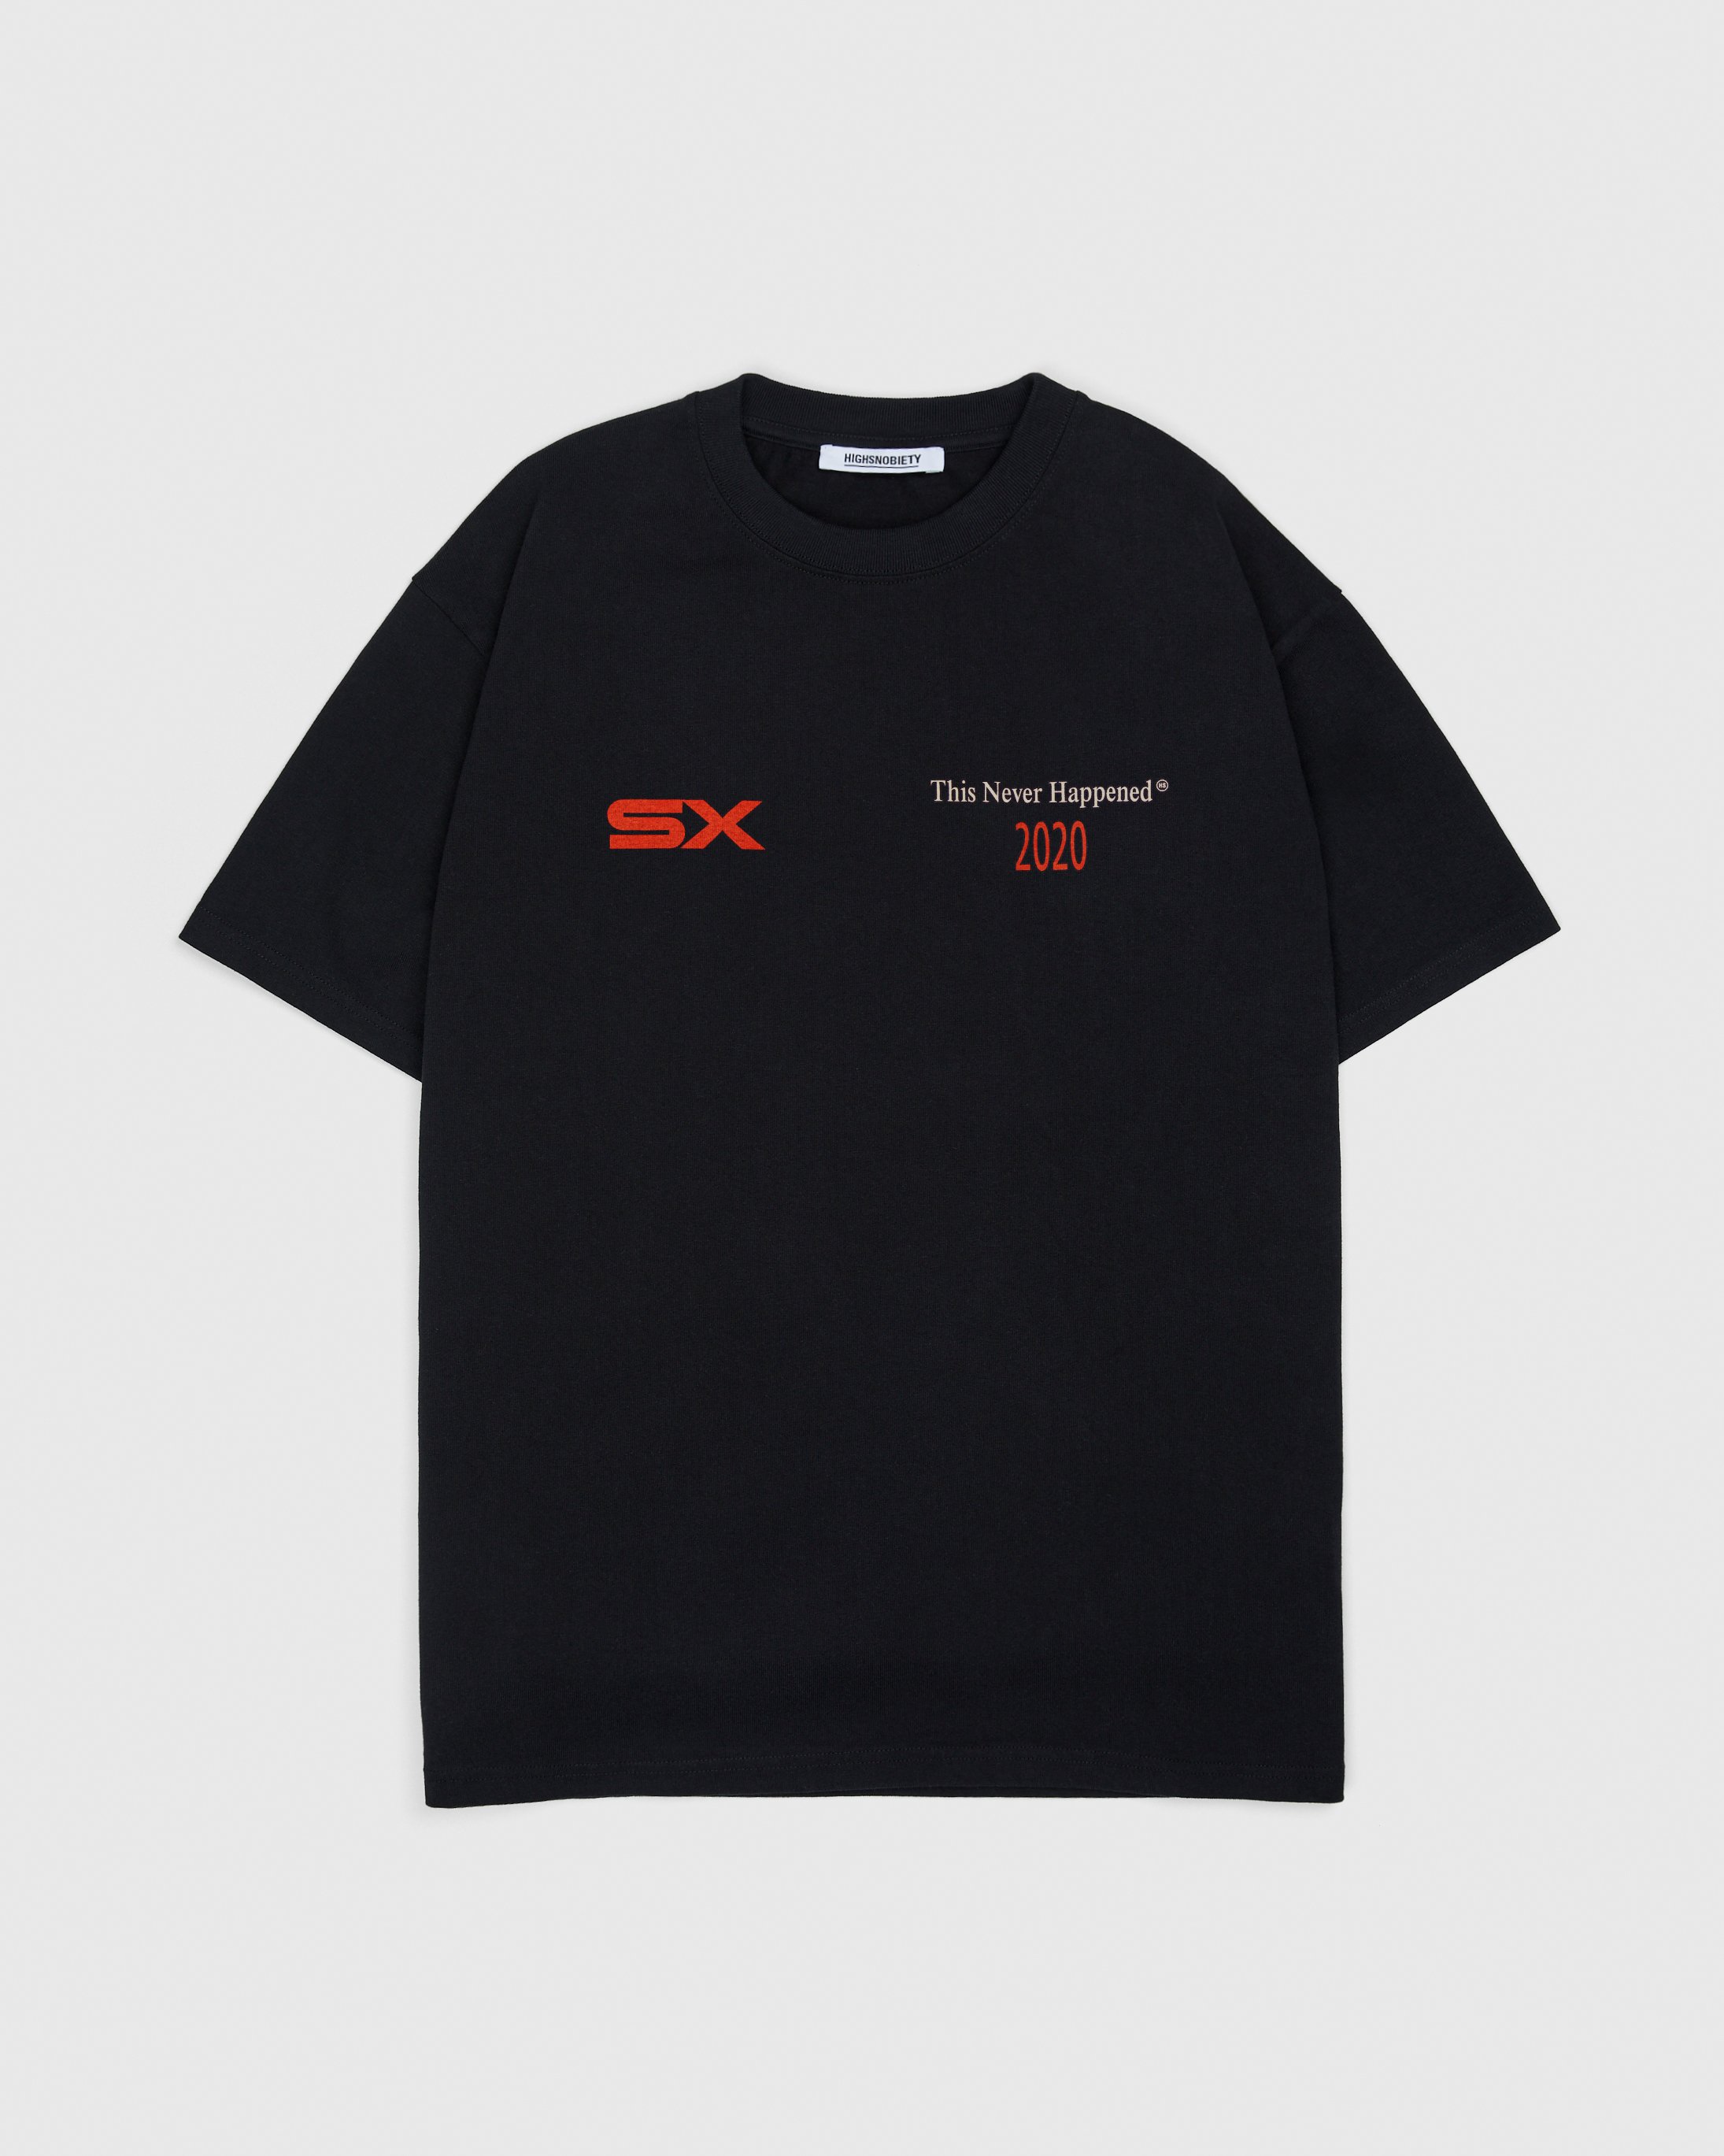 Highsnobiety - This Never Happened Dance Clubs T-Shirt Black - Clothing - Black - Image 2